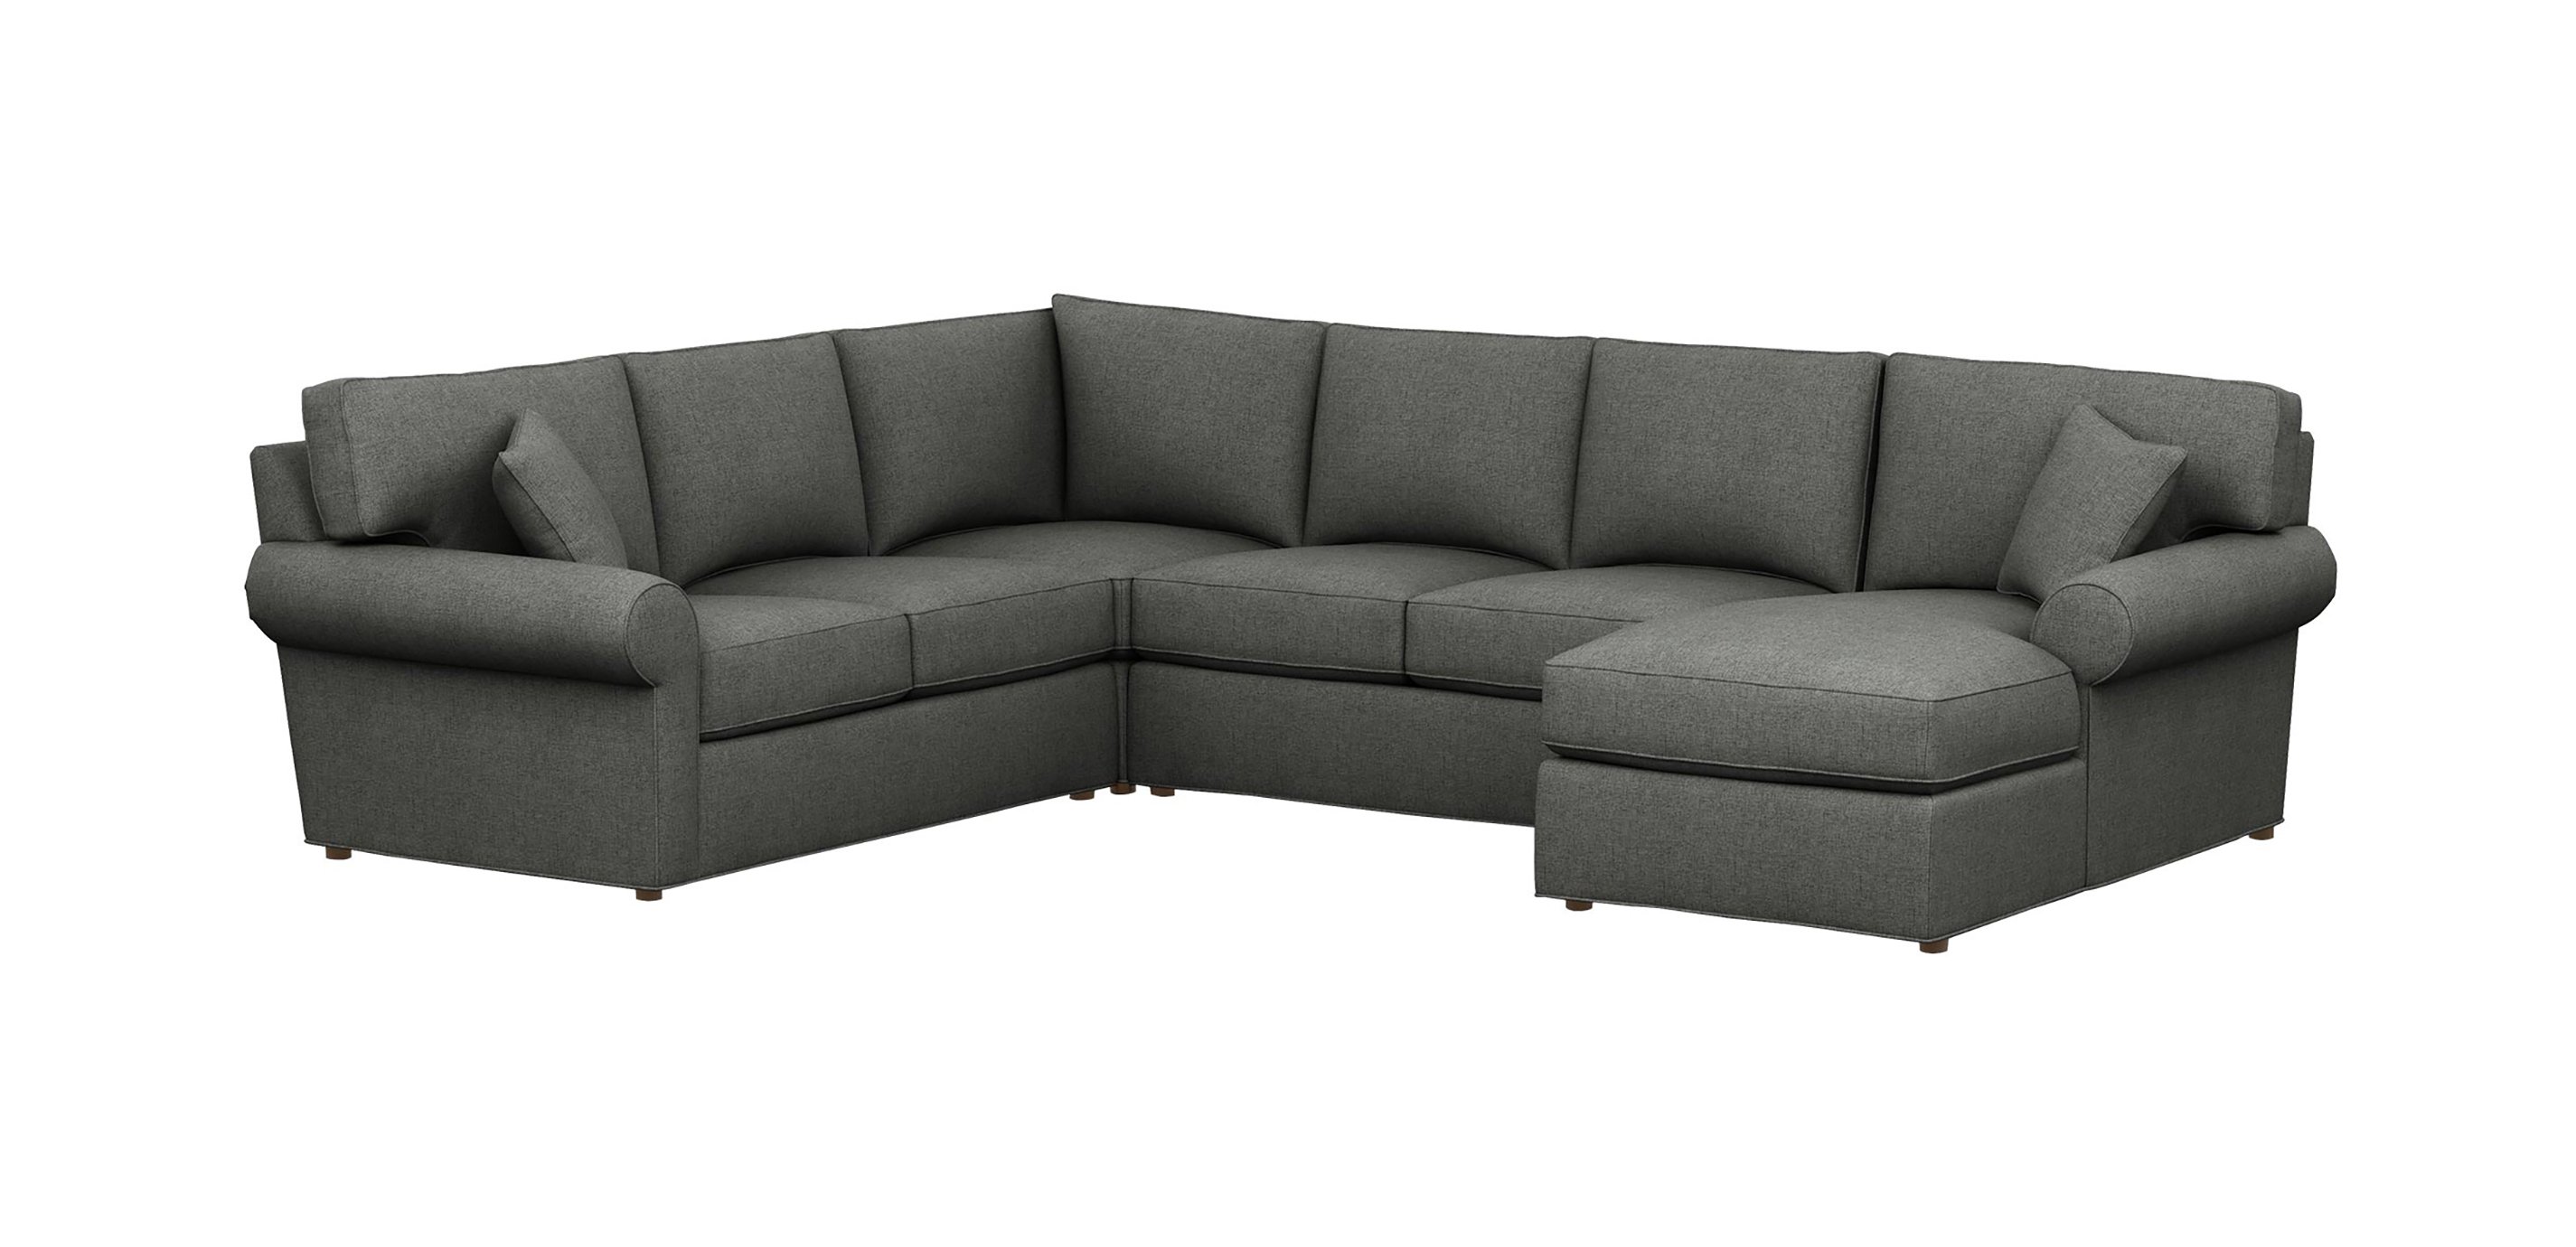 Retreat Roll-Arm Four Seat Sectional with Chaise | Ethan Allen